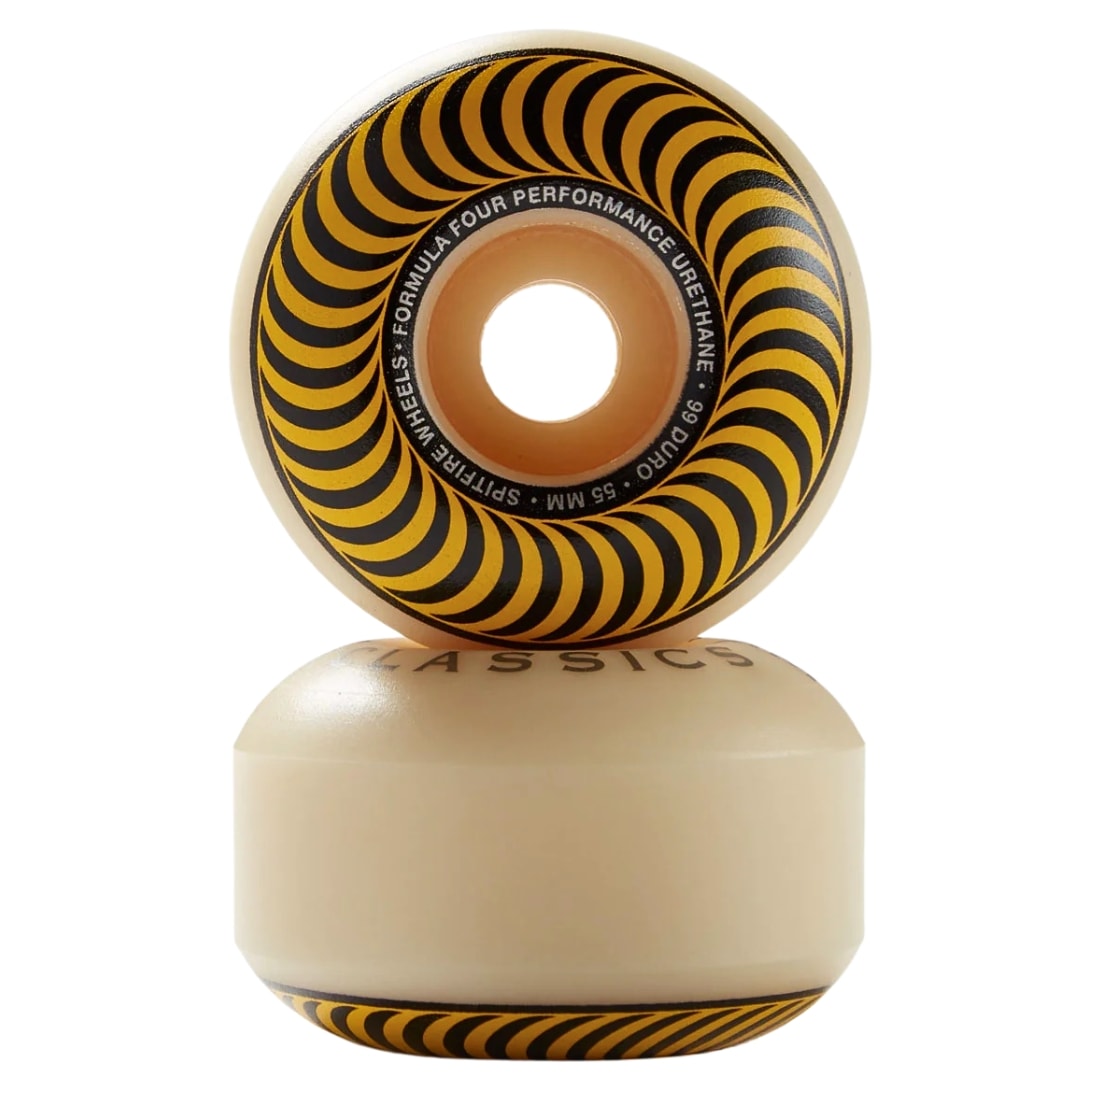 Spitfire 55mm Formula Four 99Duro Classic Skateboard Wheels - Natural/Yellow - Skateboard Wheels by Spitfire 55mm